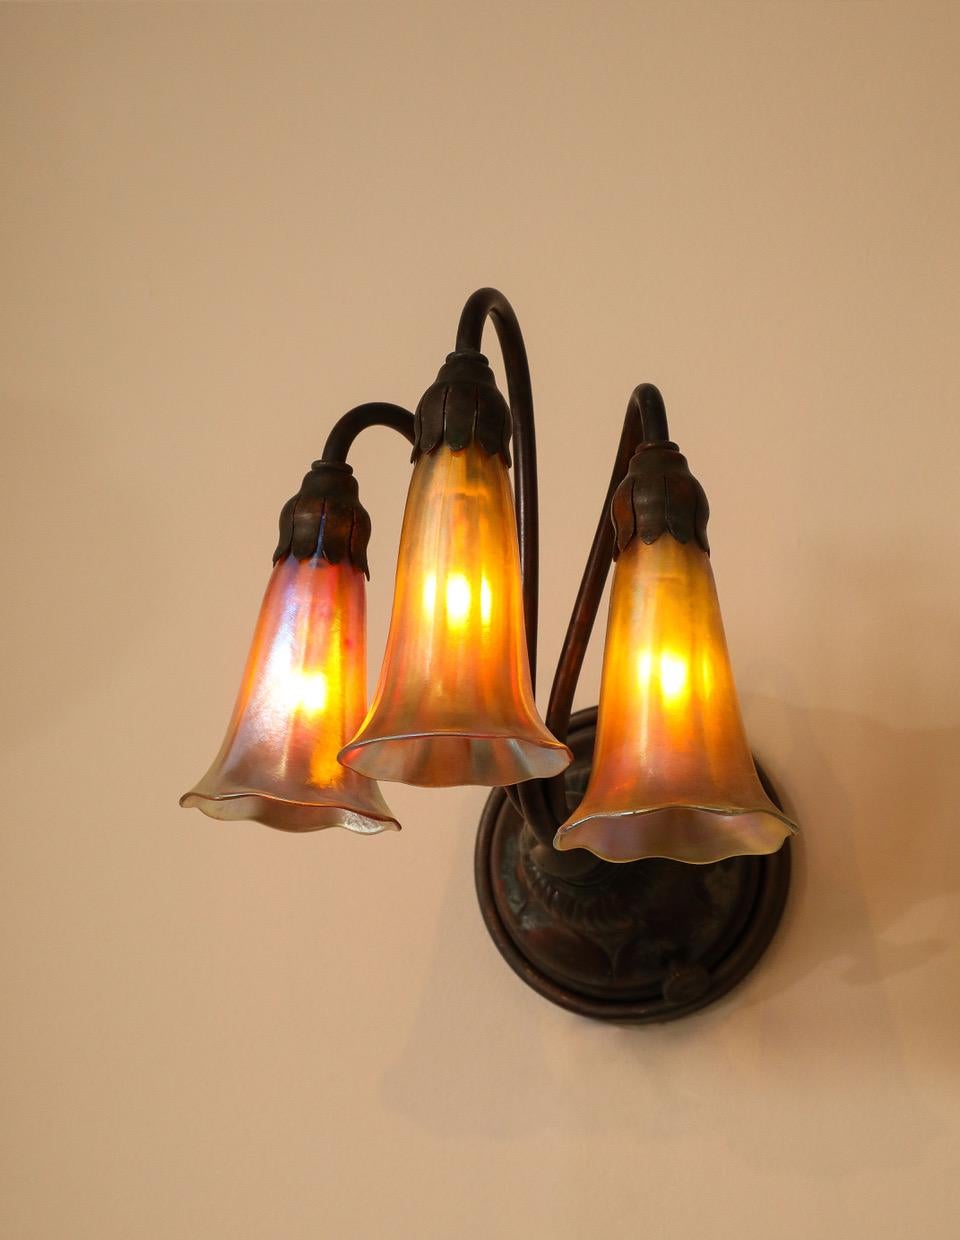 Each bronze wall fixture with three arms each supporting an art glass Lily, signed L.C.T.

Electric is UL Certified 